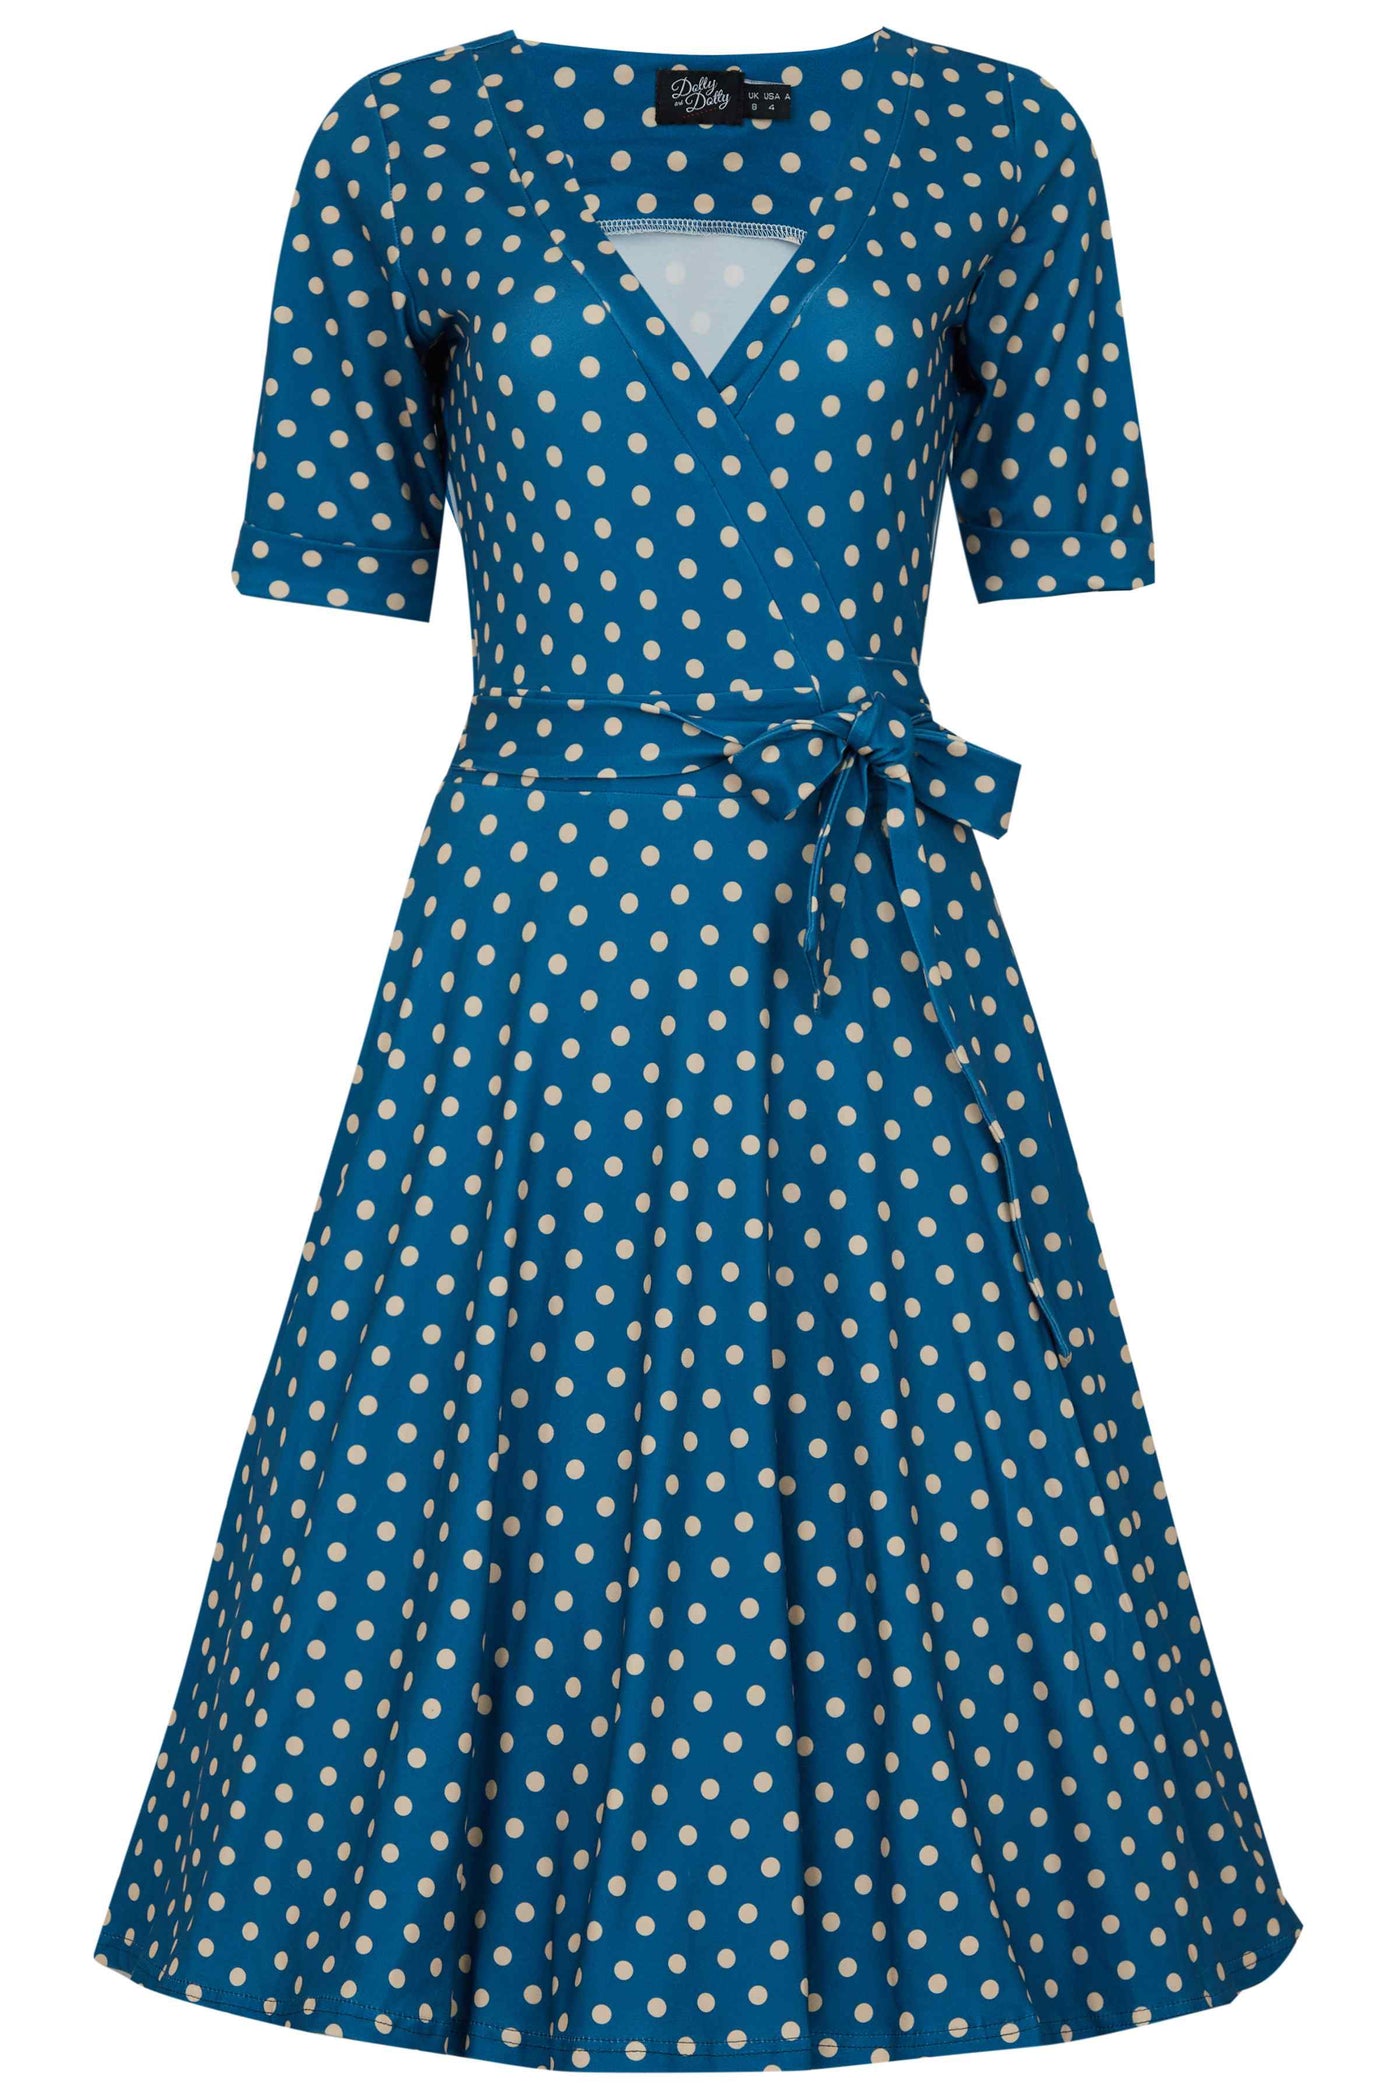 Front View of Peacock Blue and Cream Polka Dot Wrap Dress